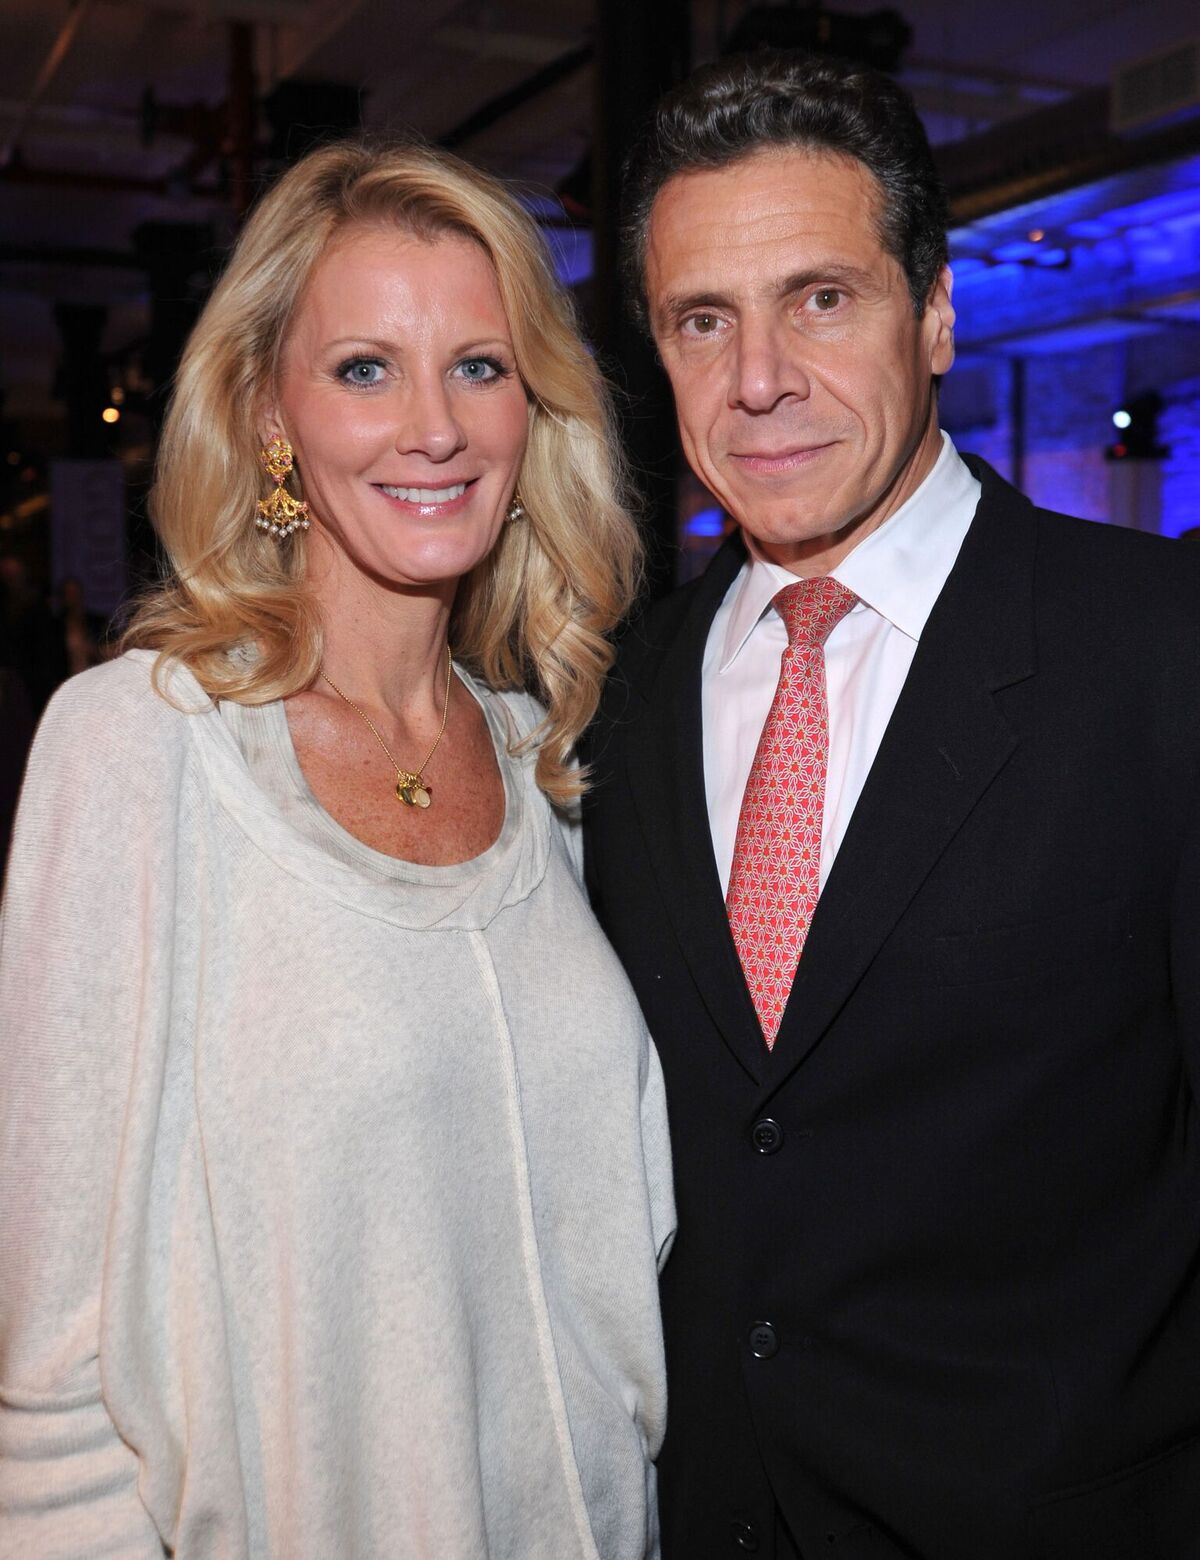 Sandra Lee and New York Governor Andrew Cuomo attend Diet Pepsi Spices Up NYC's Wine and Food Festival in 2011 | Photo: Getty Images